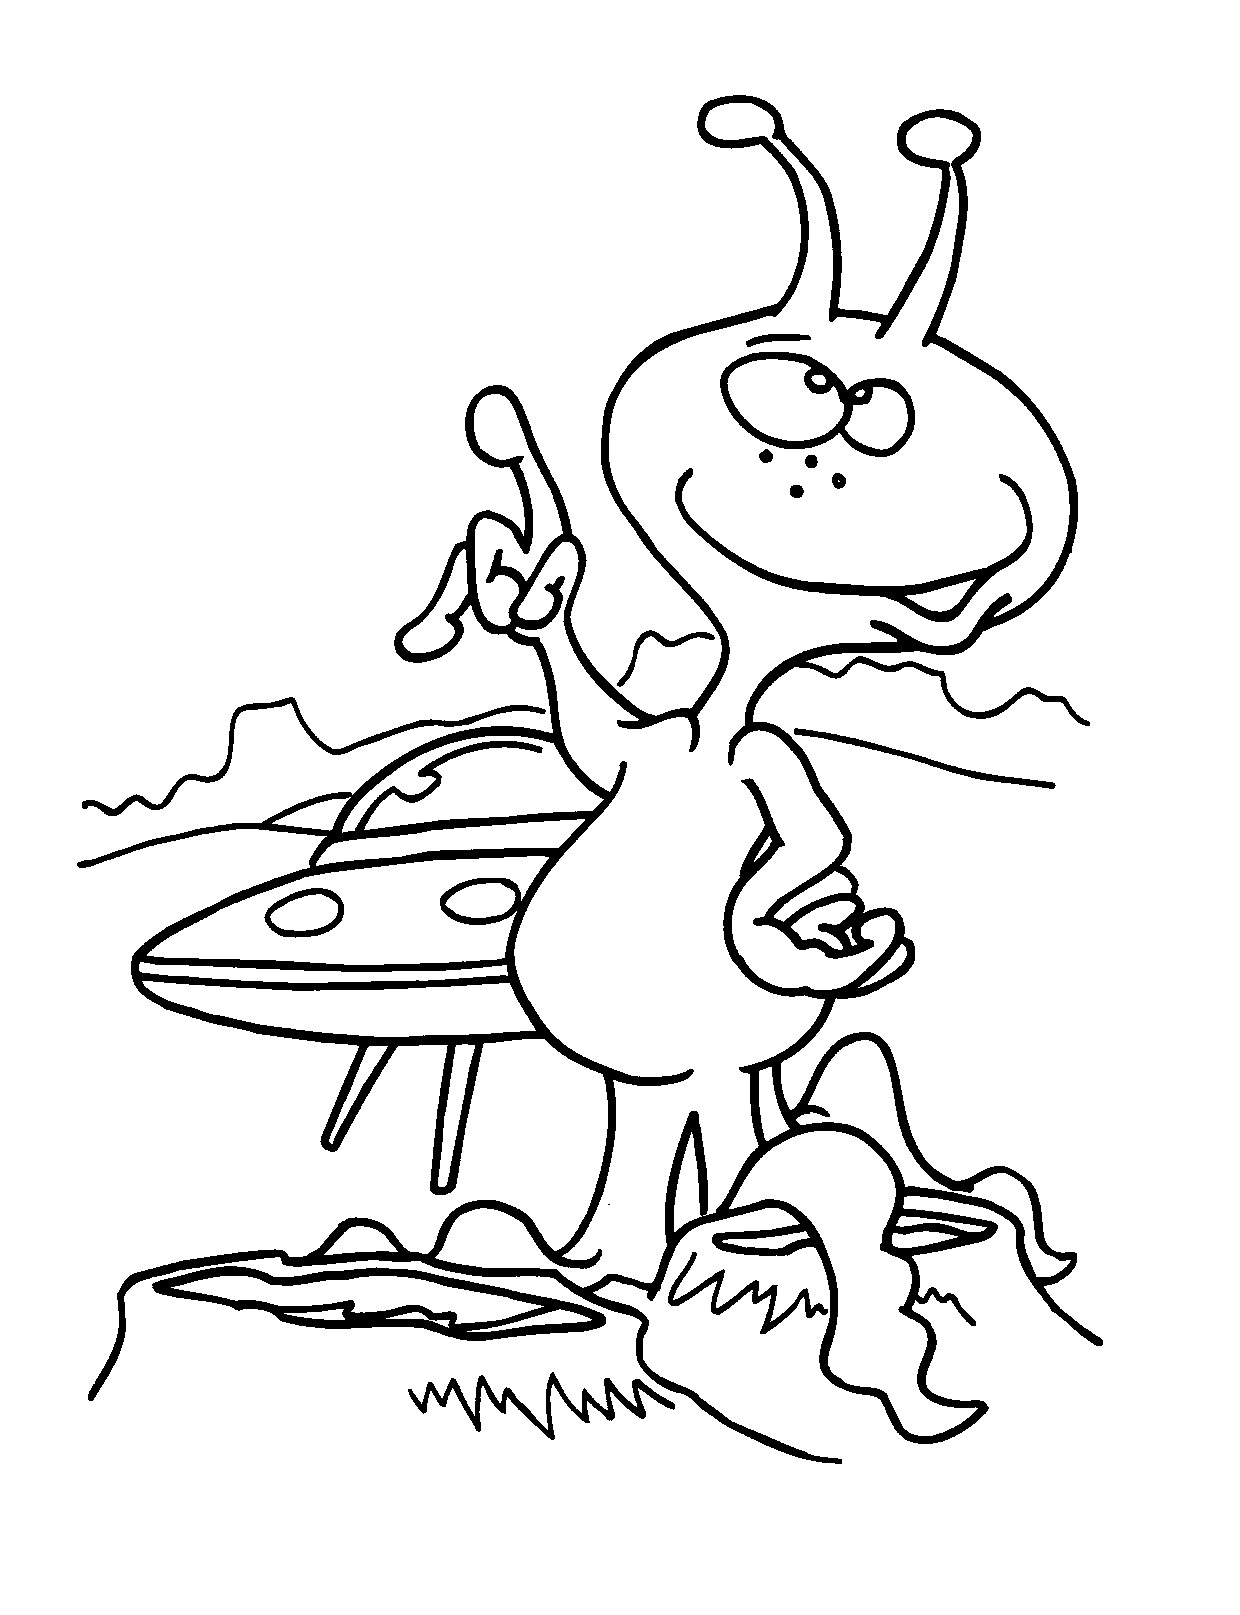 Alien Coloring Pages - UFO and Aliens